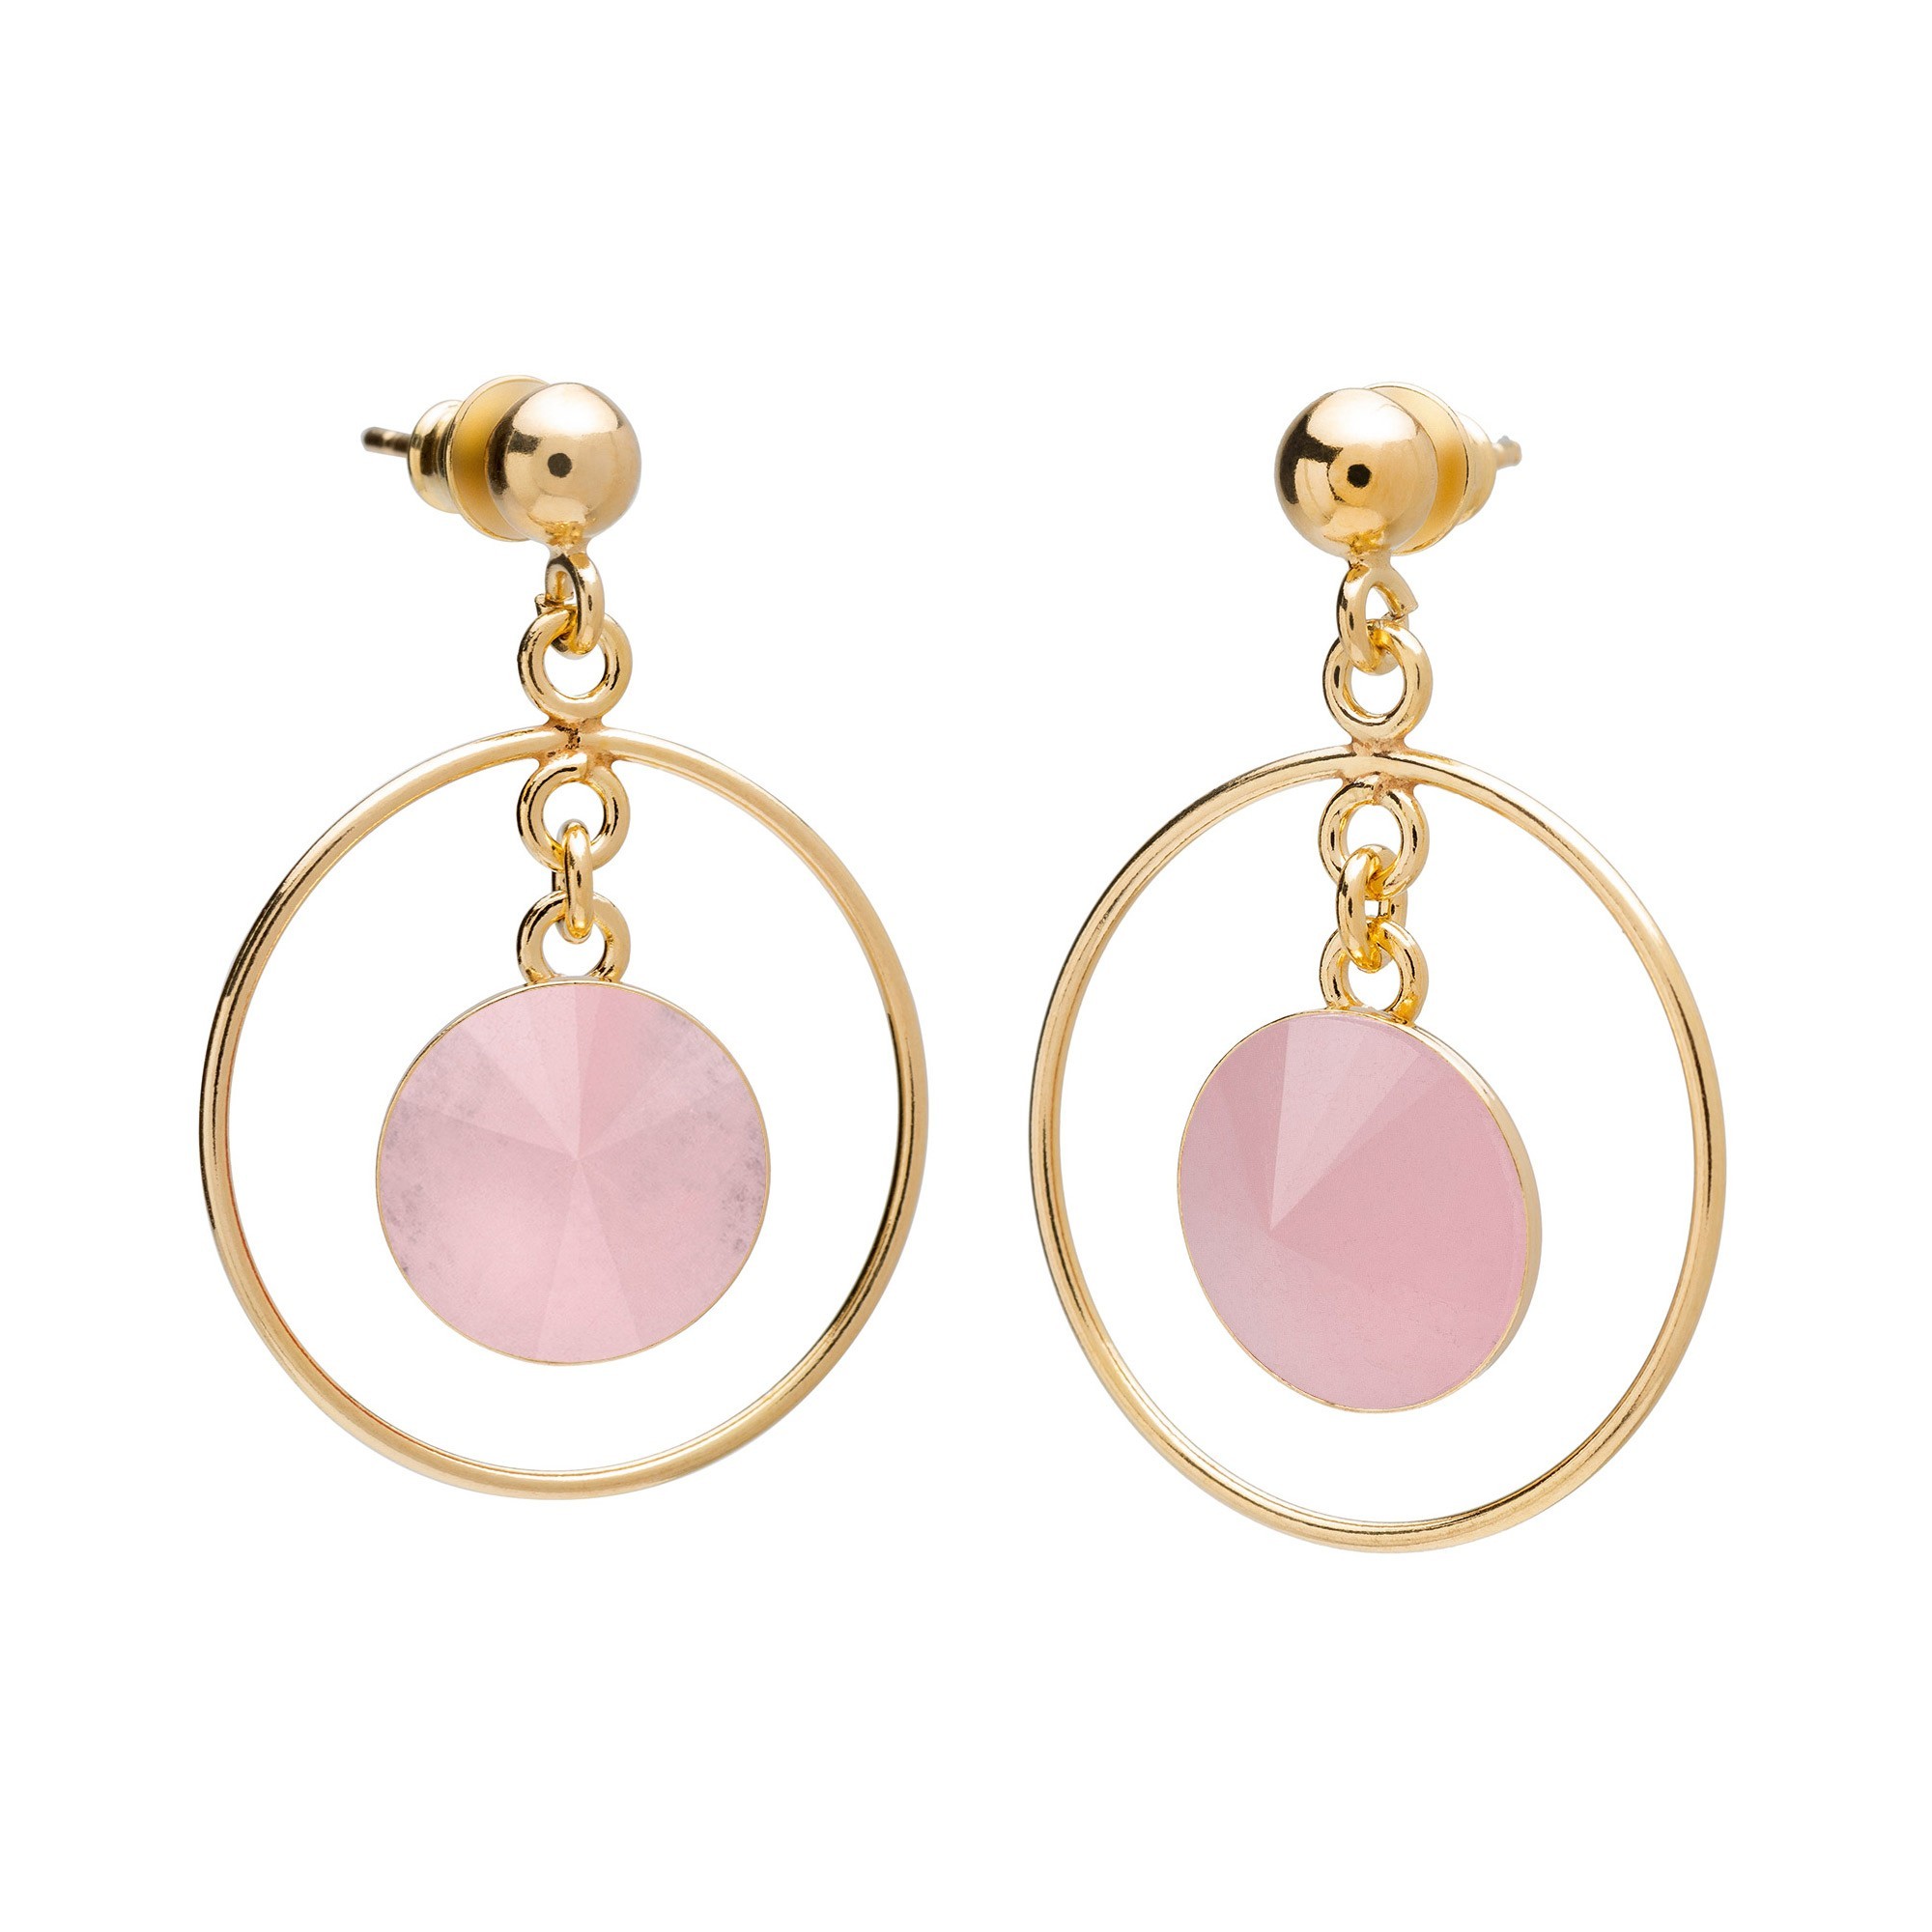 Round earrings with natural stone, 925